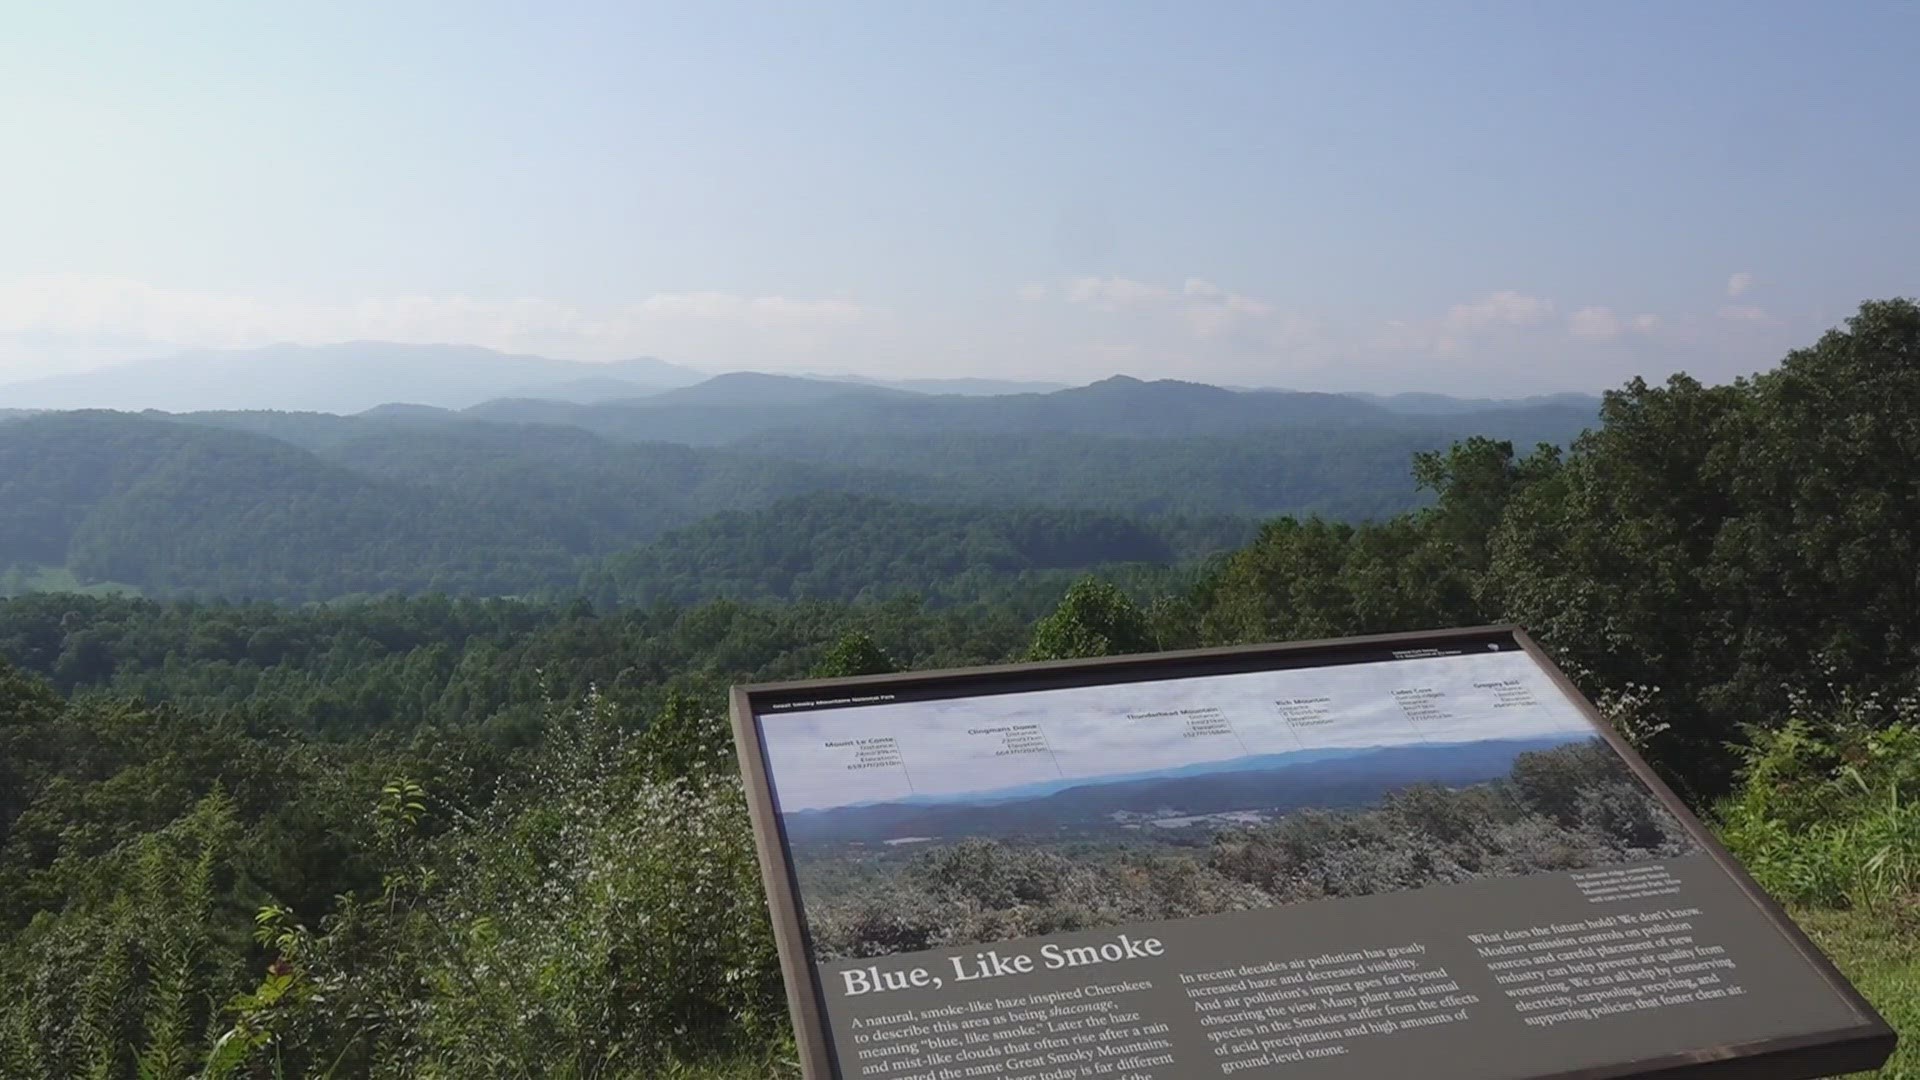 The GSMNP ranked at the top of the list for visitor spending in the U.S. The NPS said the lodging and restaurant sectors saw the biggest direct effects.